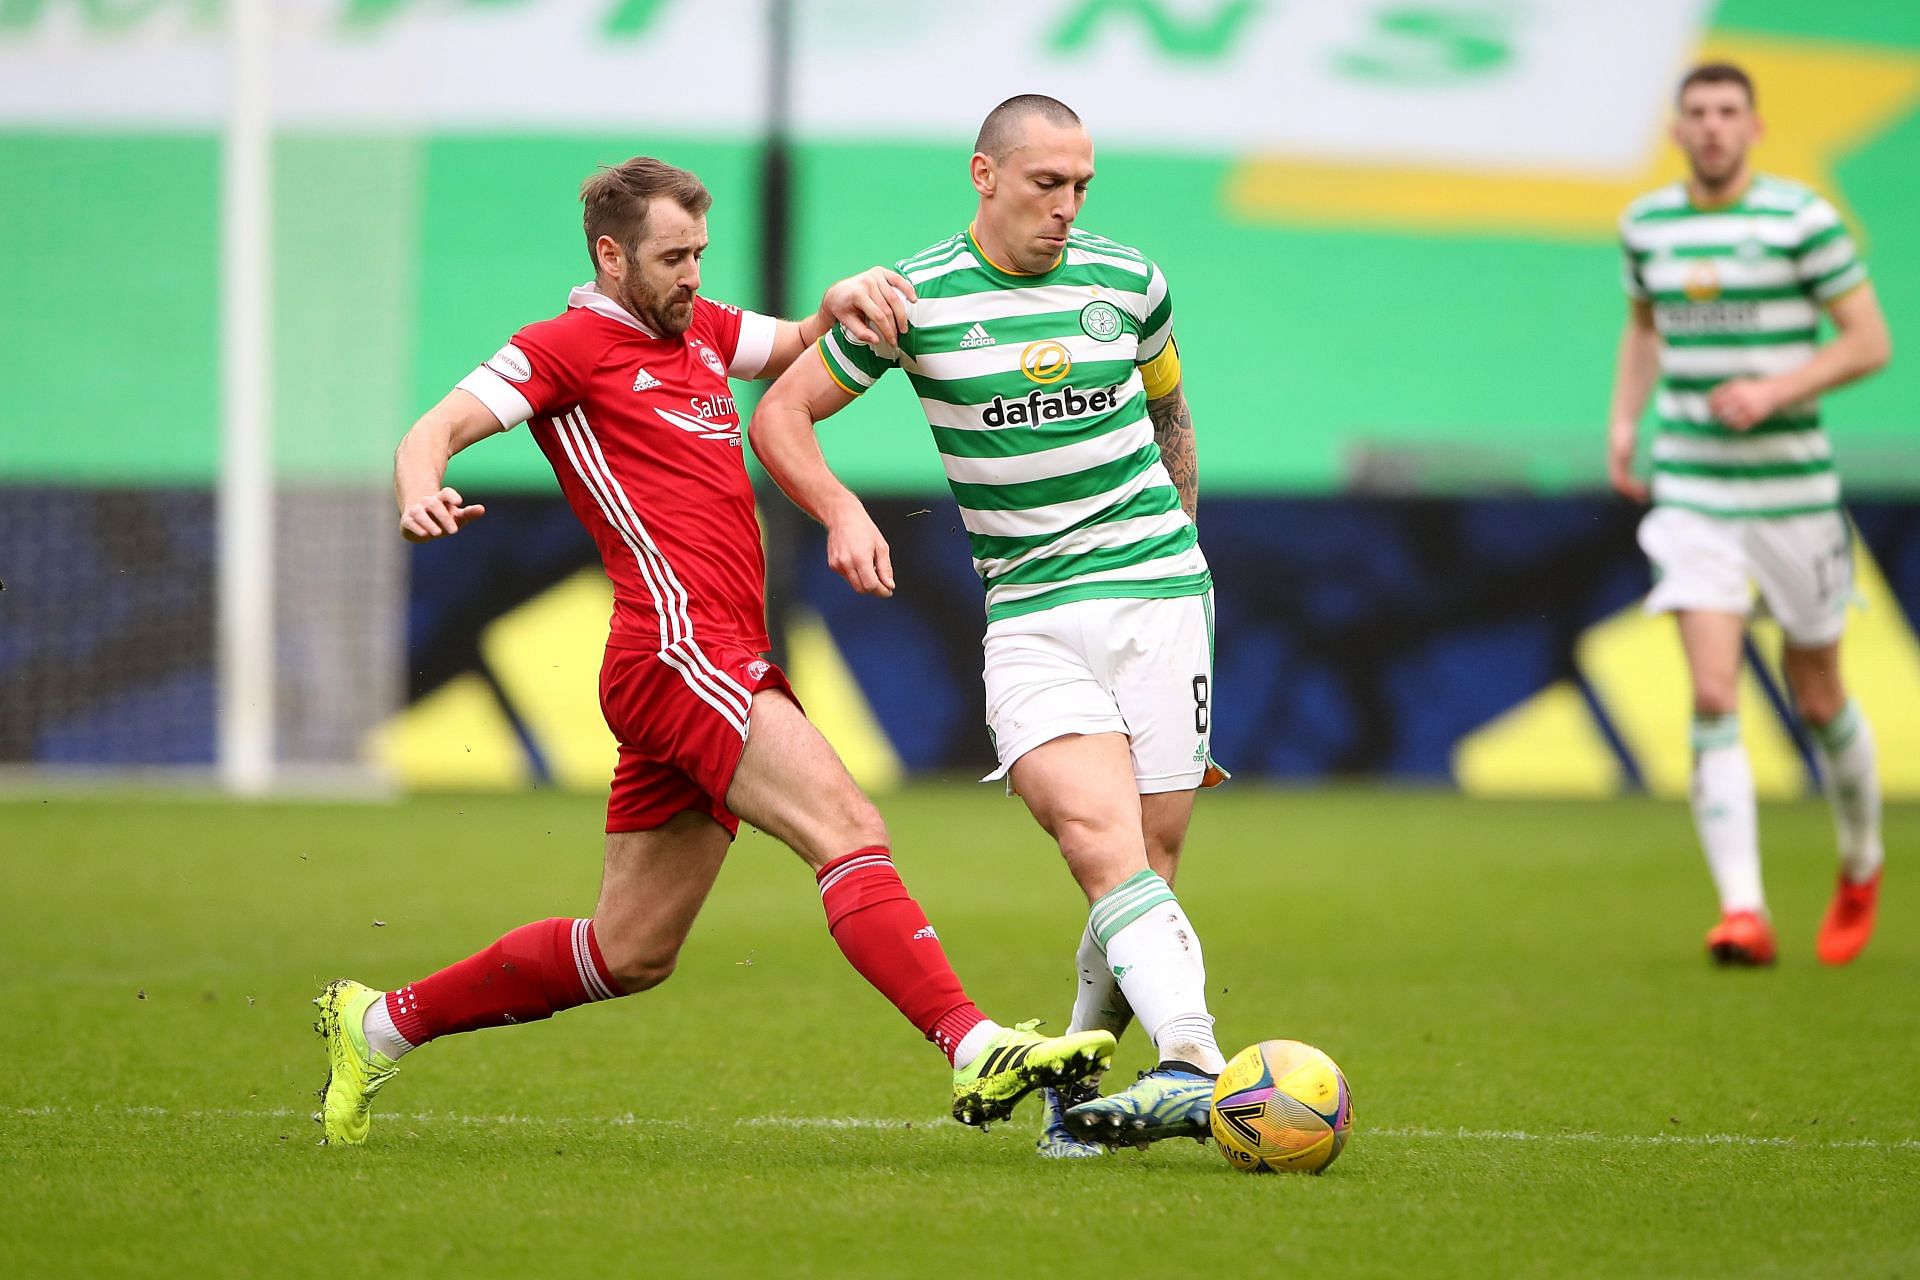 Aberdeen play host to Celtic on Wednesday